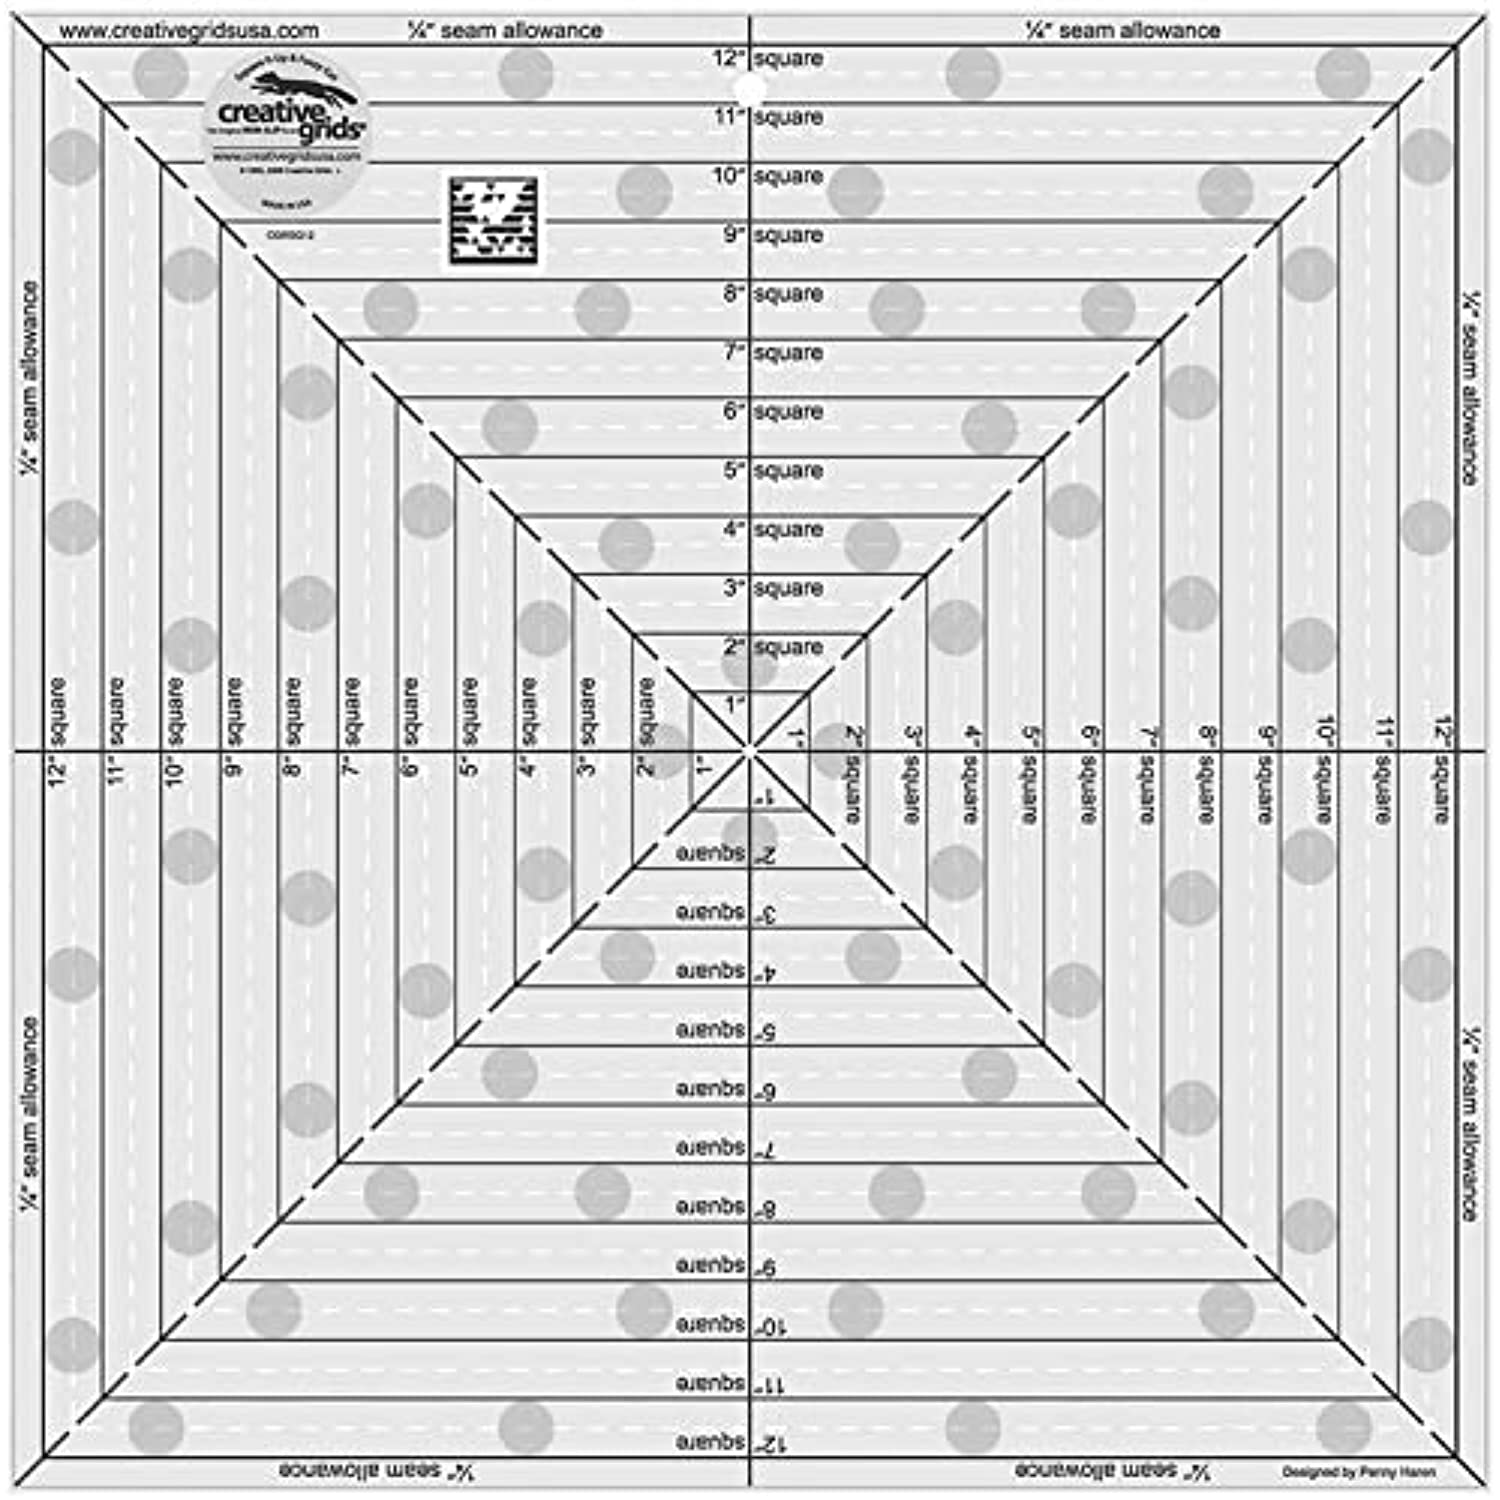 Creative Grids Quilt Ruler 11-1/2in x 11-1/2in - CGR11 